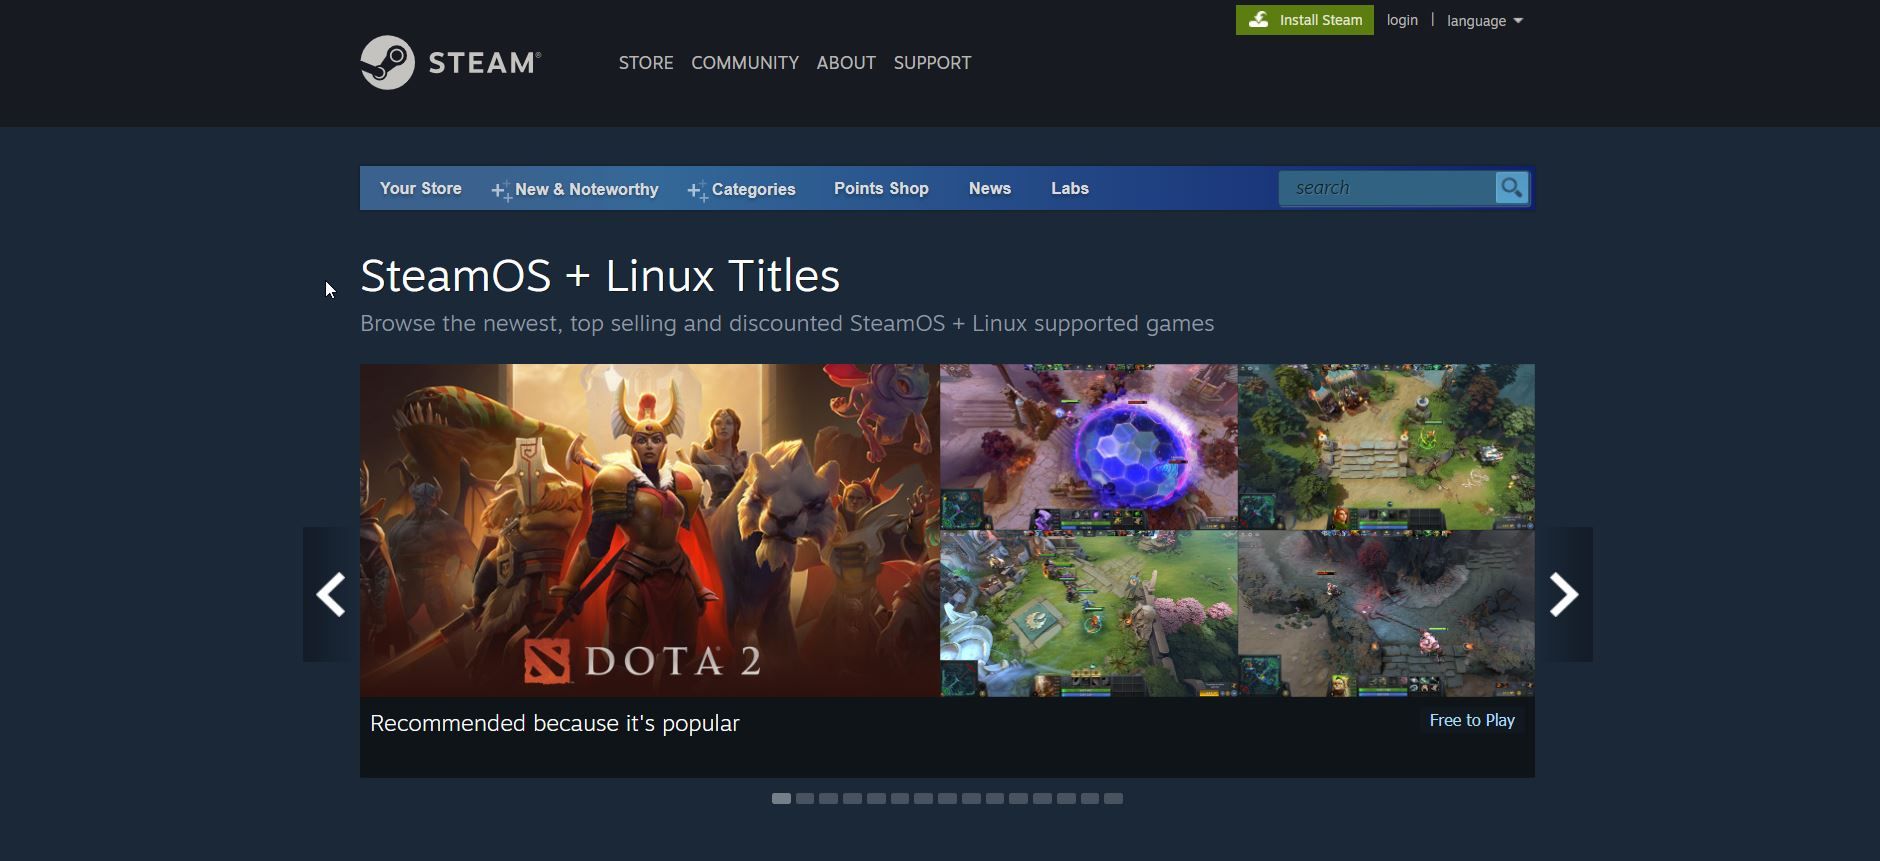 SteamOS and Linux Games on Steam website